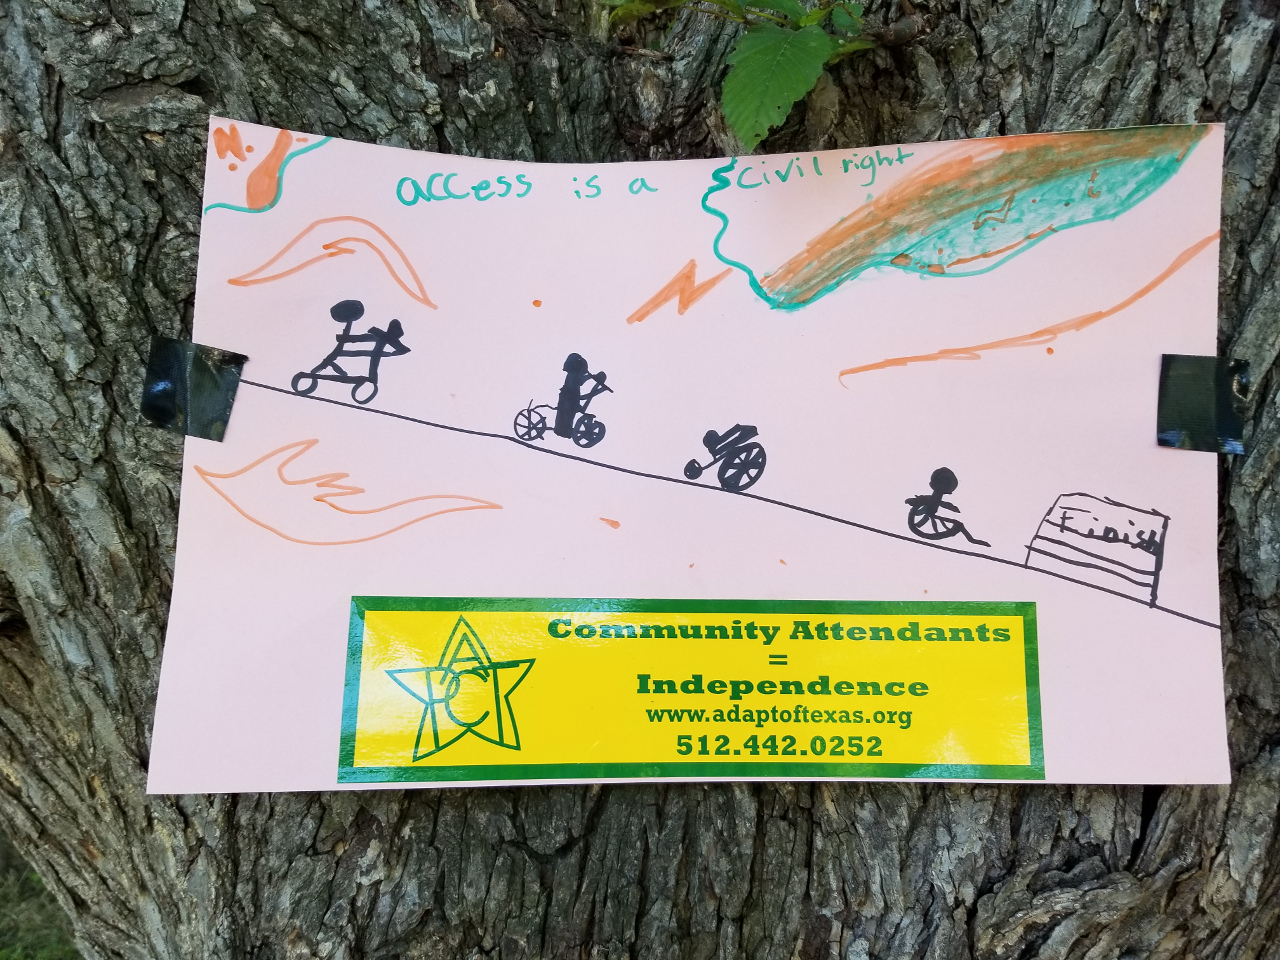 Kid’s drawing of a line of people in various kinds of wheelchairs and scooters.  Above the slogan Access is a Civil Right.  Below a Community Attendants bumper sticker.